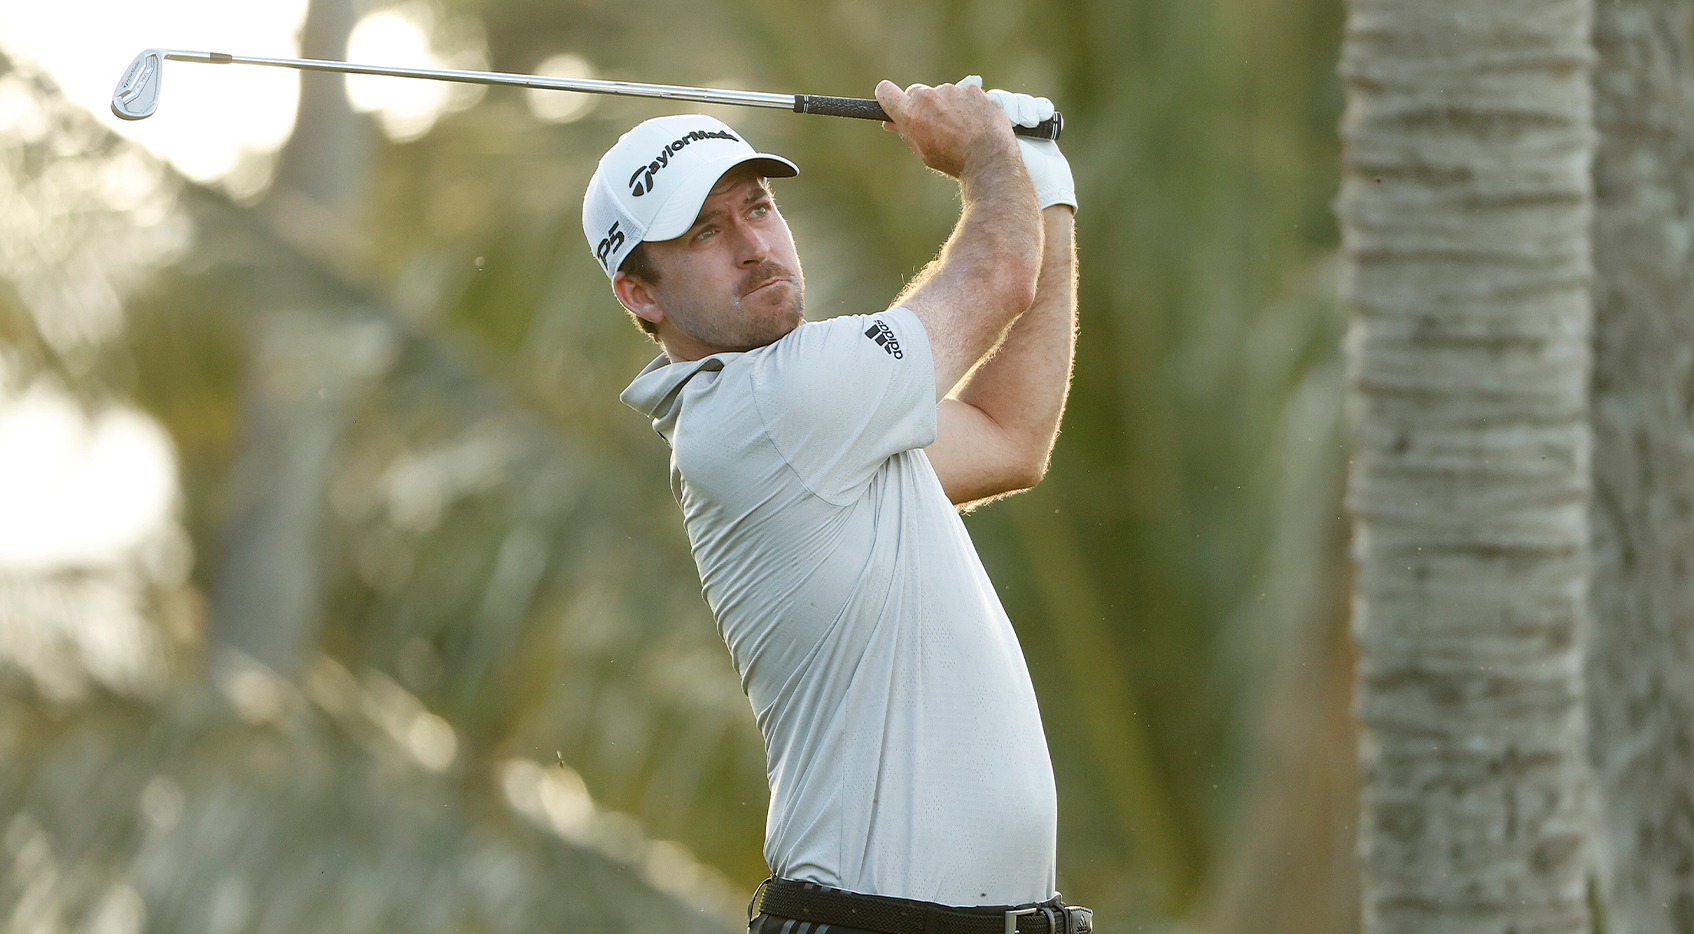 Nick Taylor leads by two at Sony Open in Hawaii